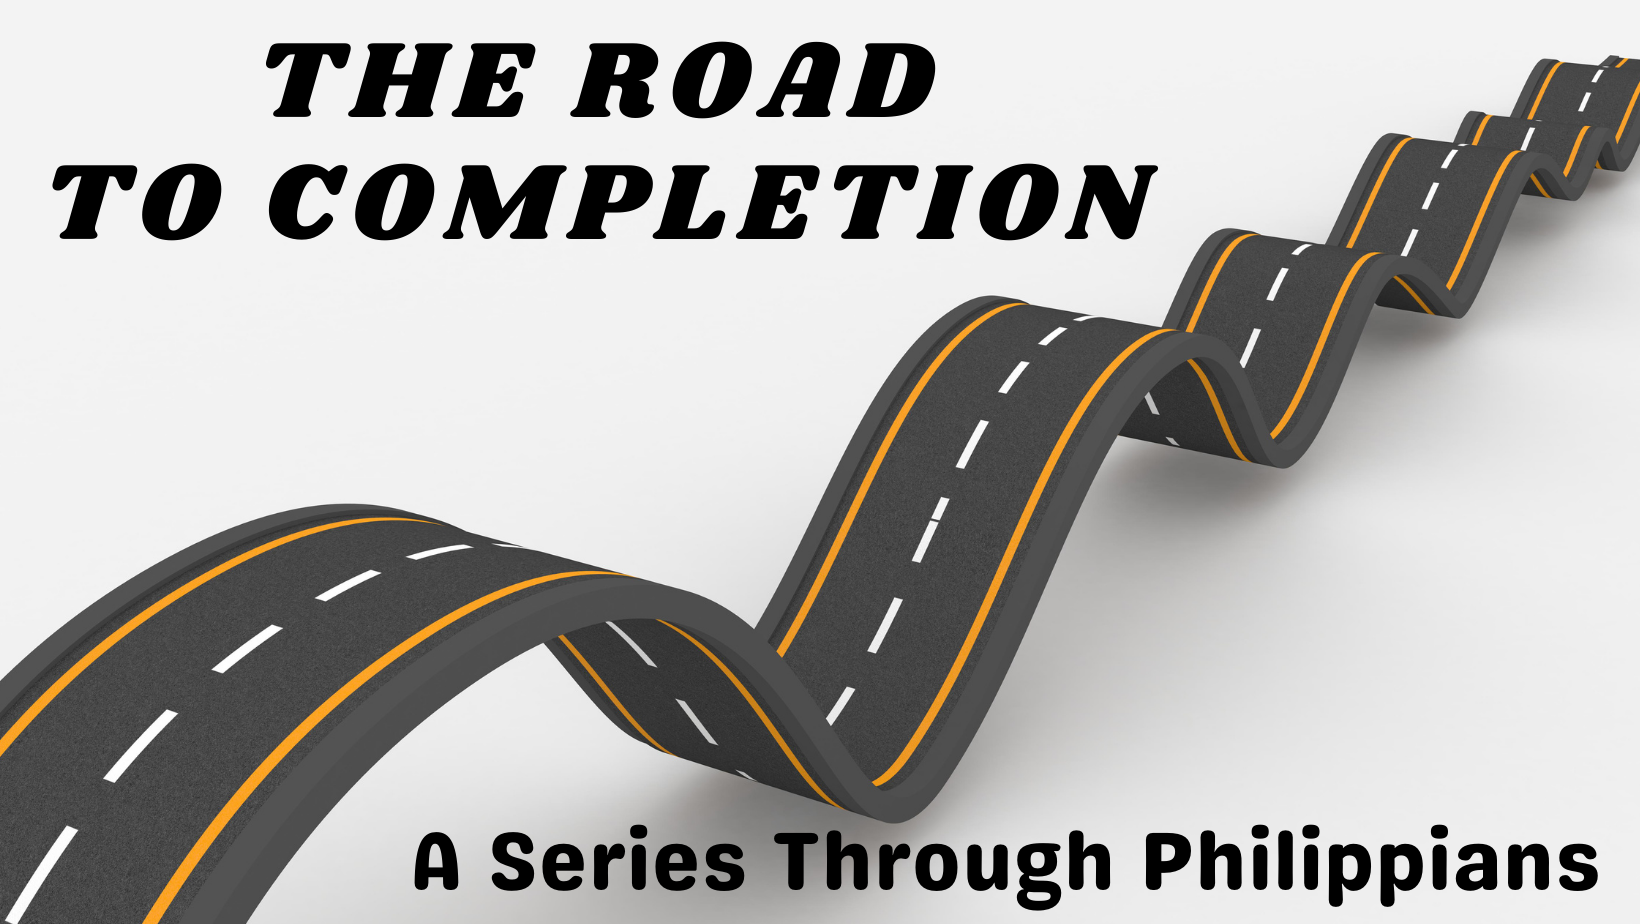 Road to Completion - Power of the Gospel.